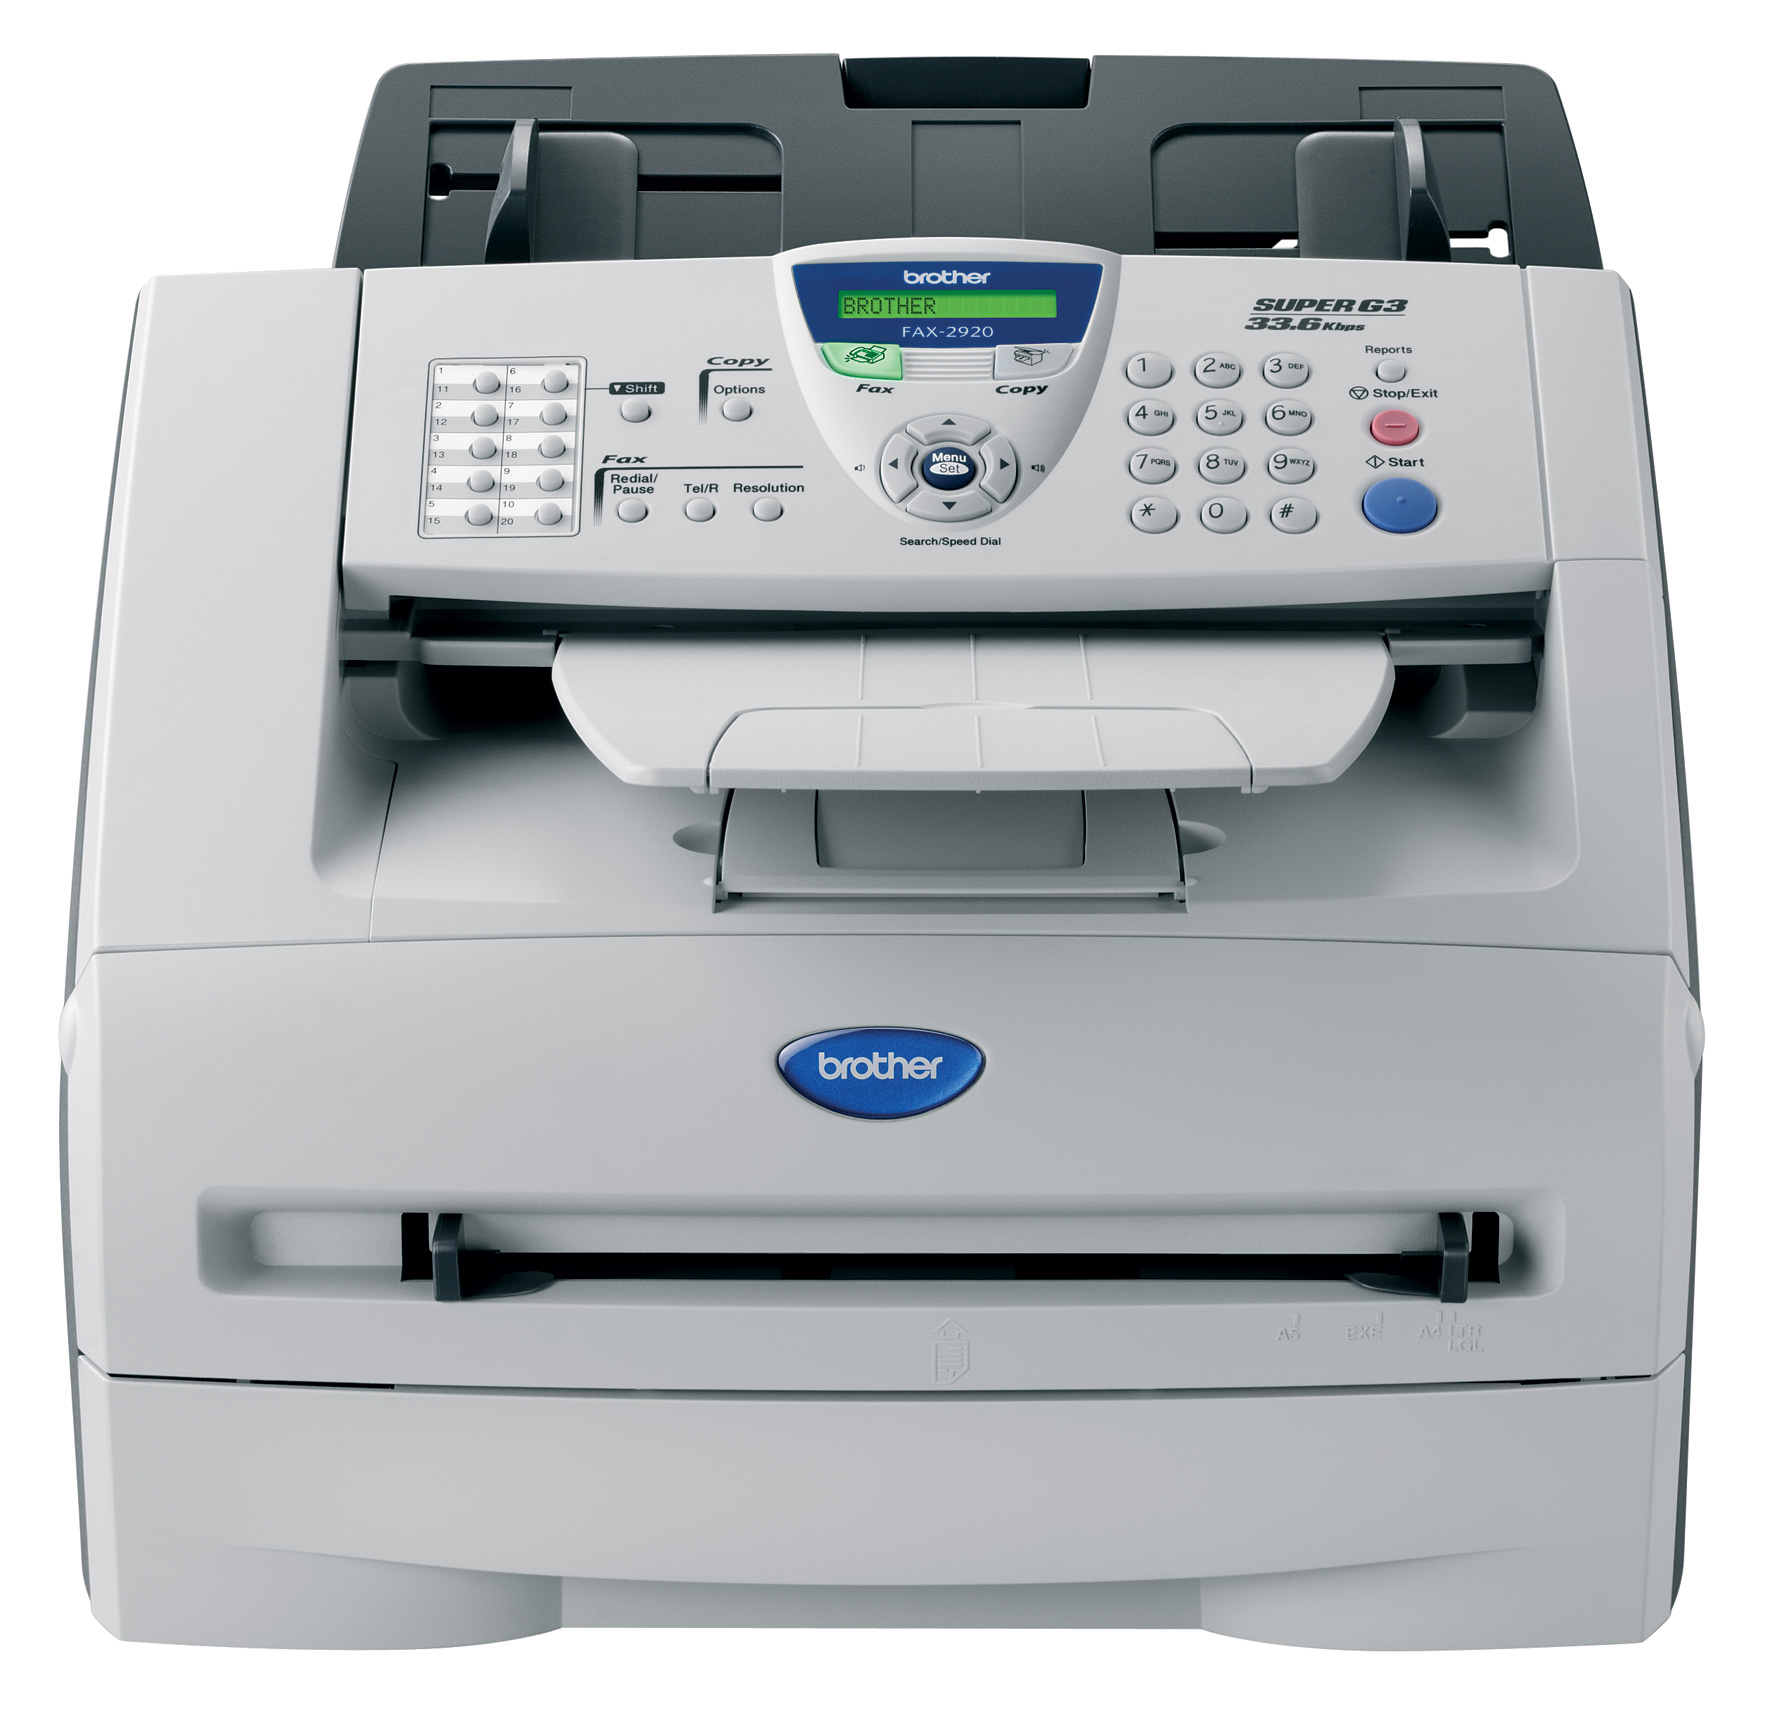 Brother Fax-2920 Multifunction Printer FAX-2920 - Refurbished